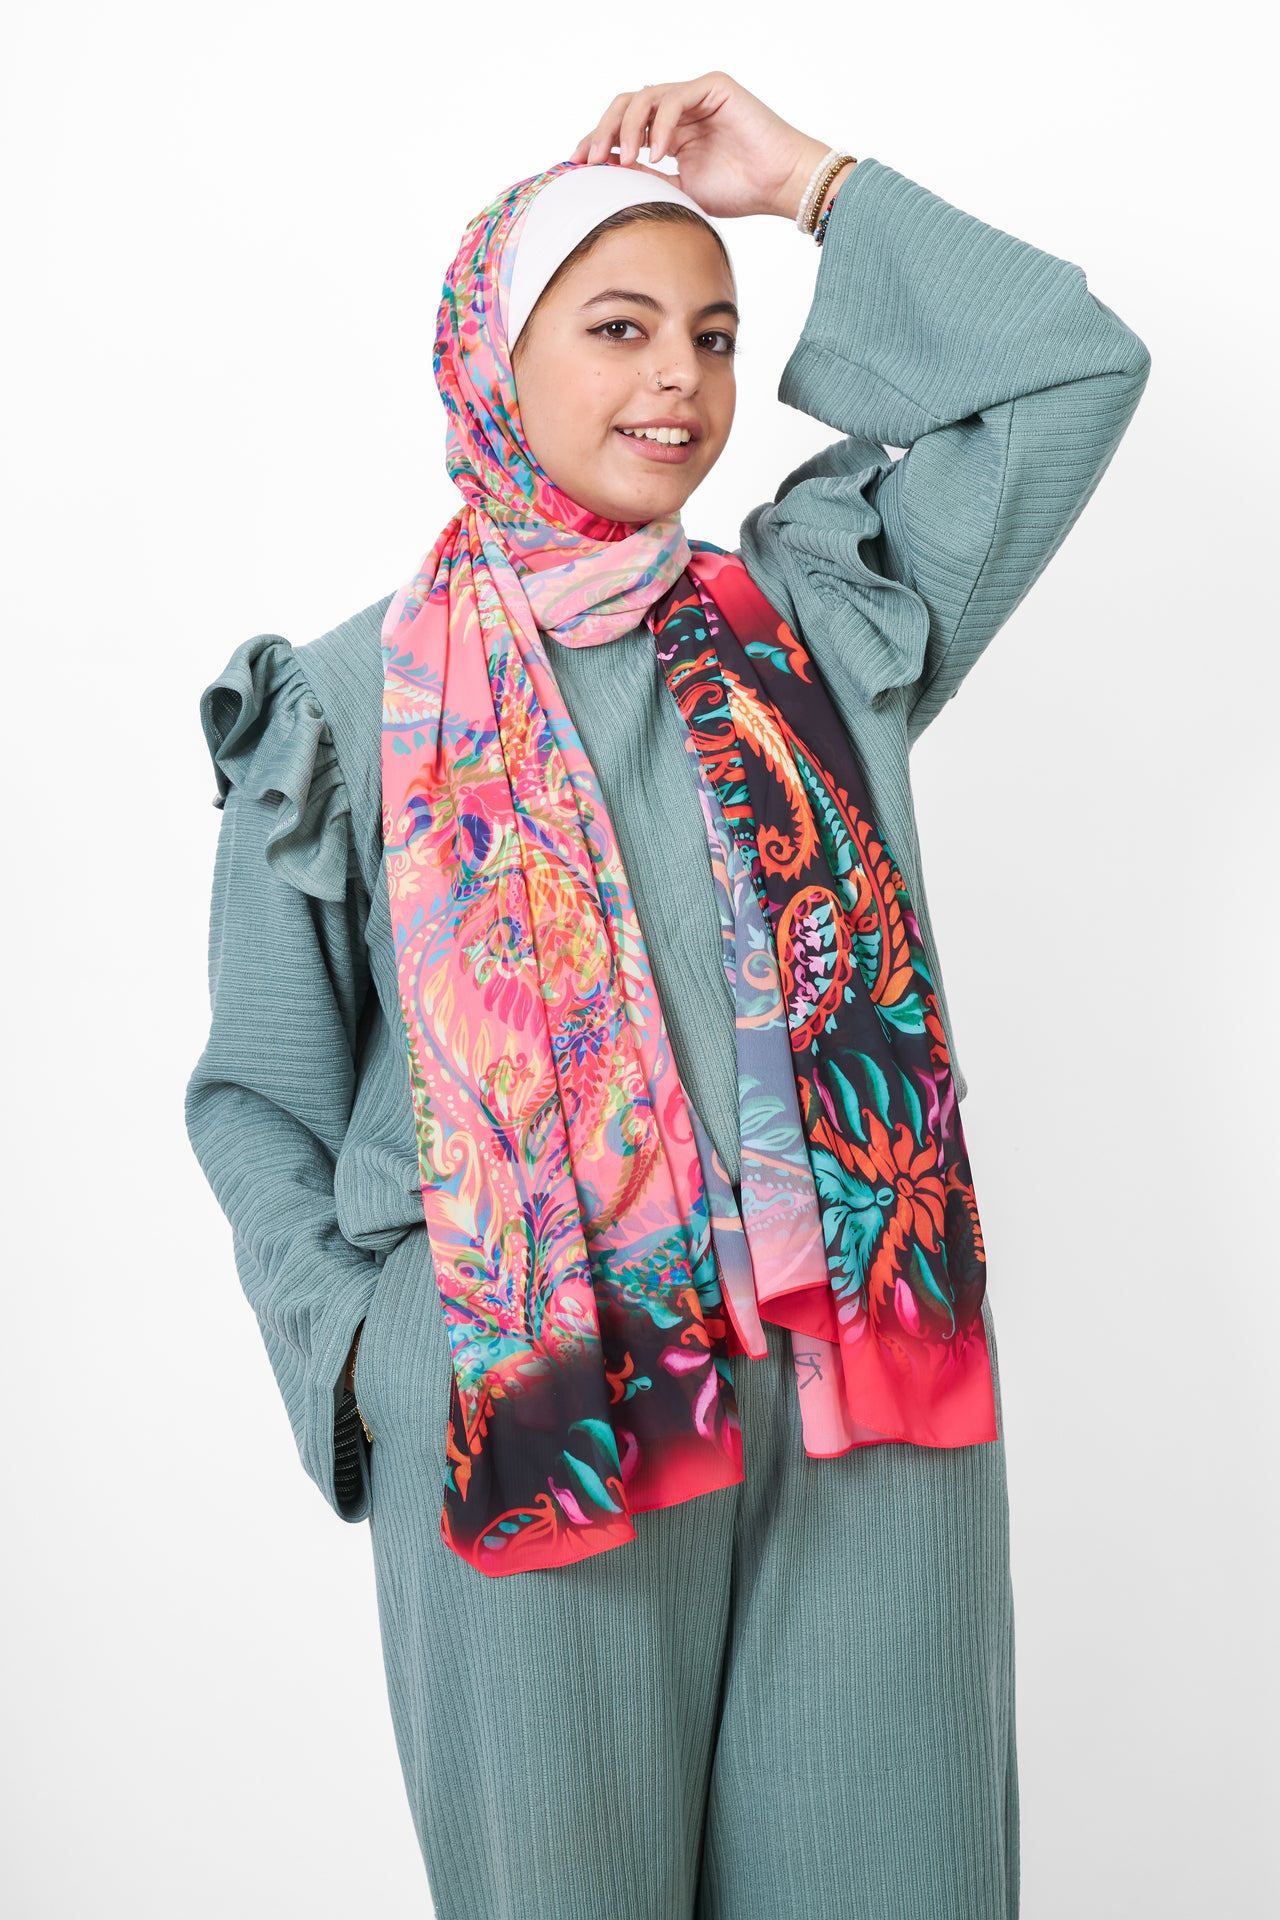 The Paisely Chiffon Scarf